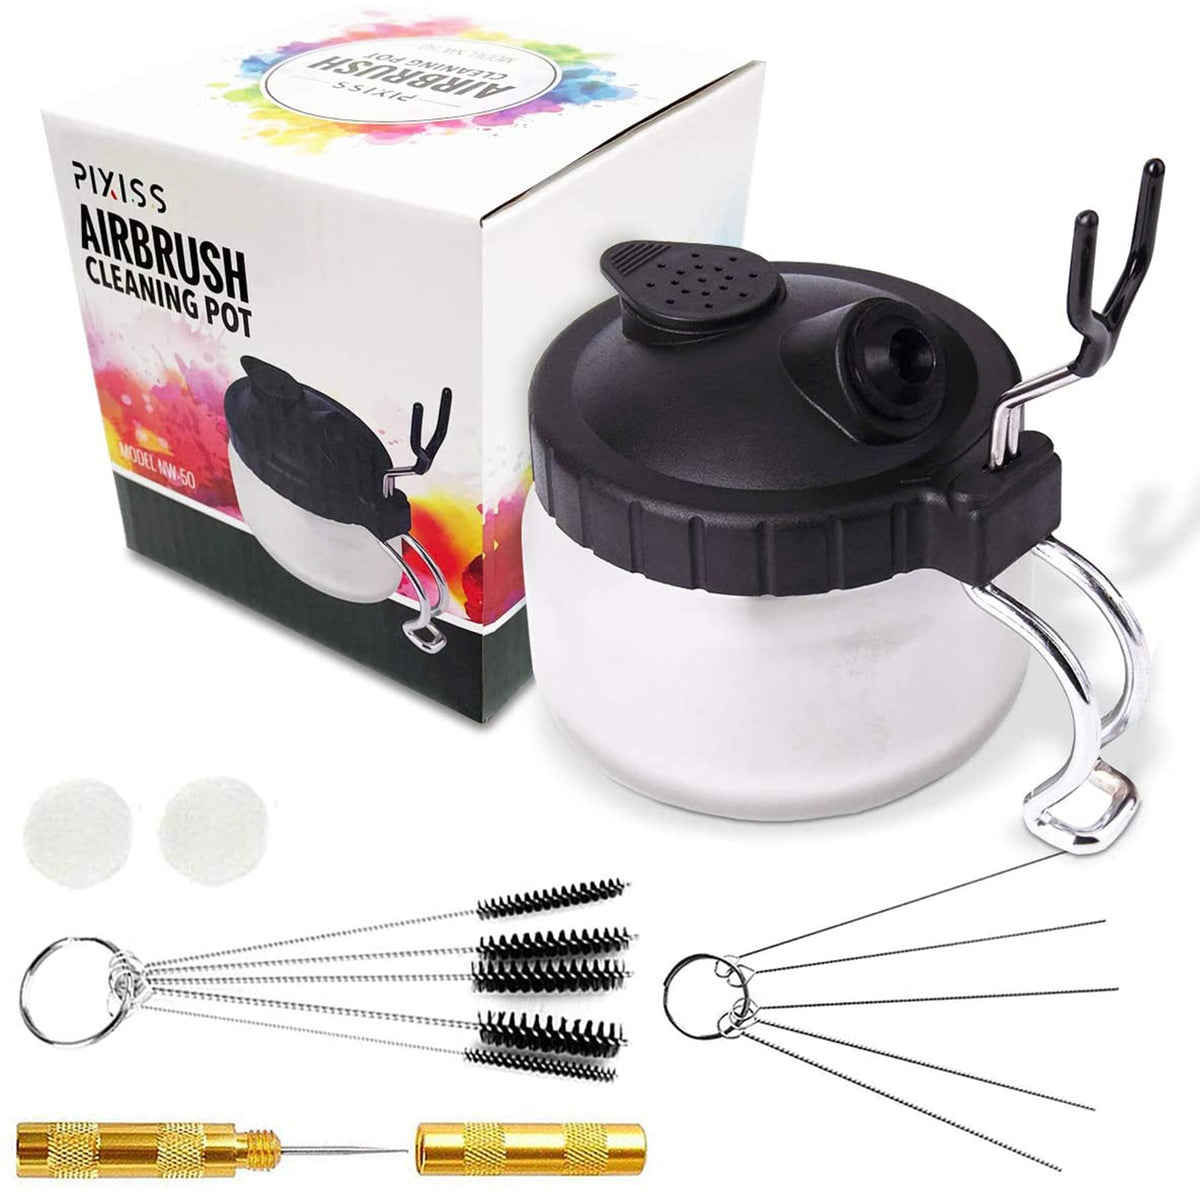 Pixiss Air Brush Painting Set with Airbrush Cleaner Pot and Brush Clea